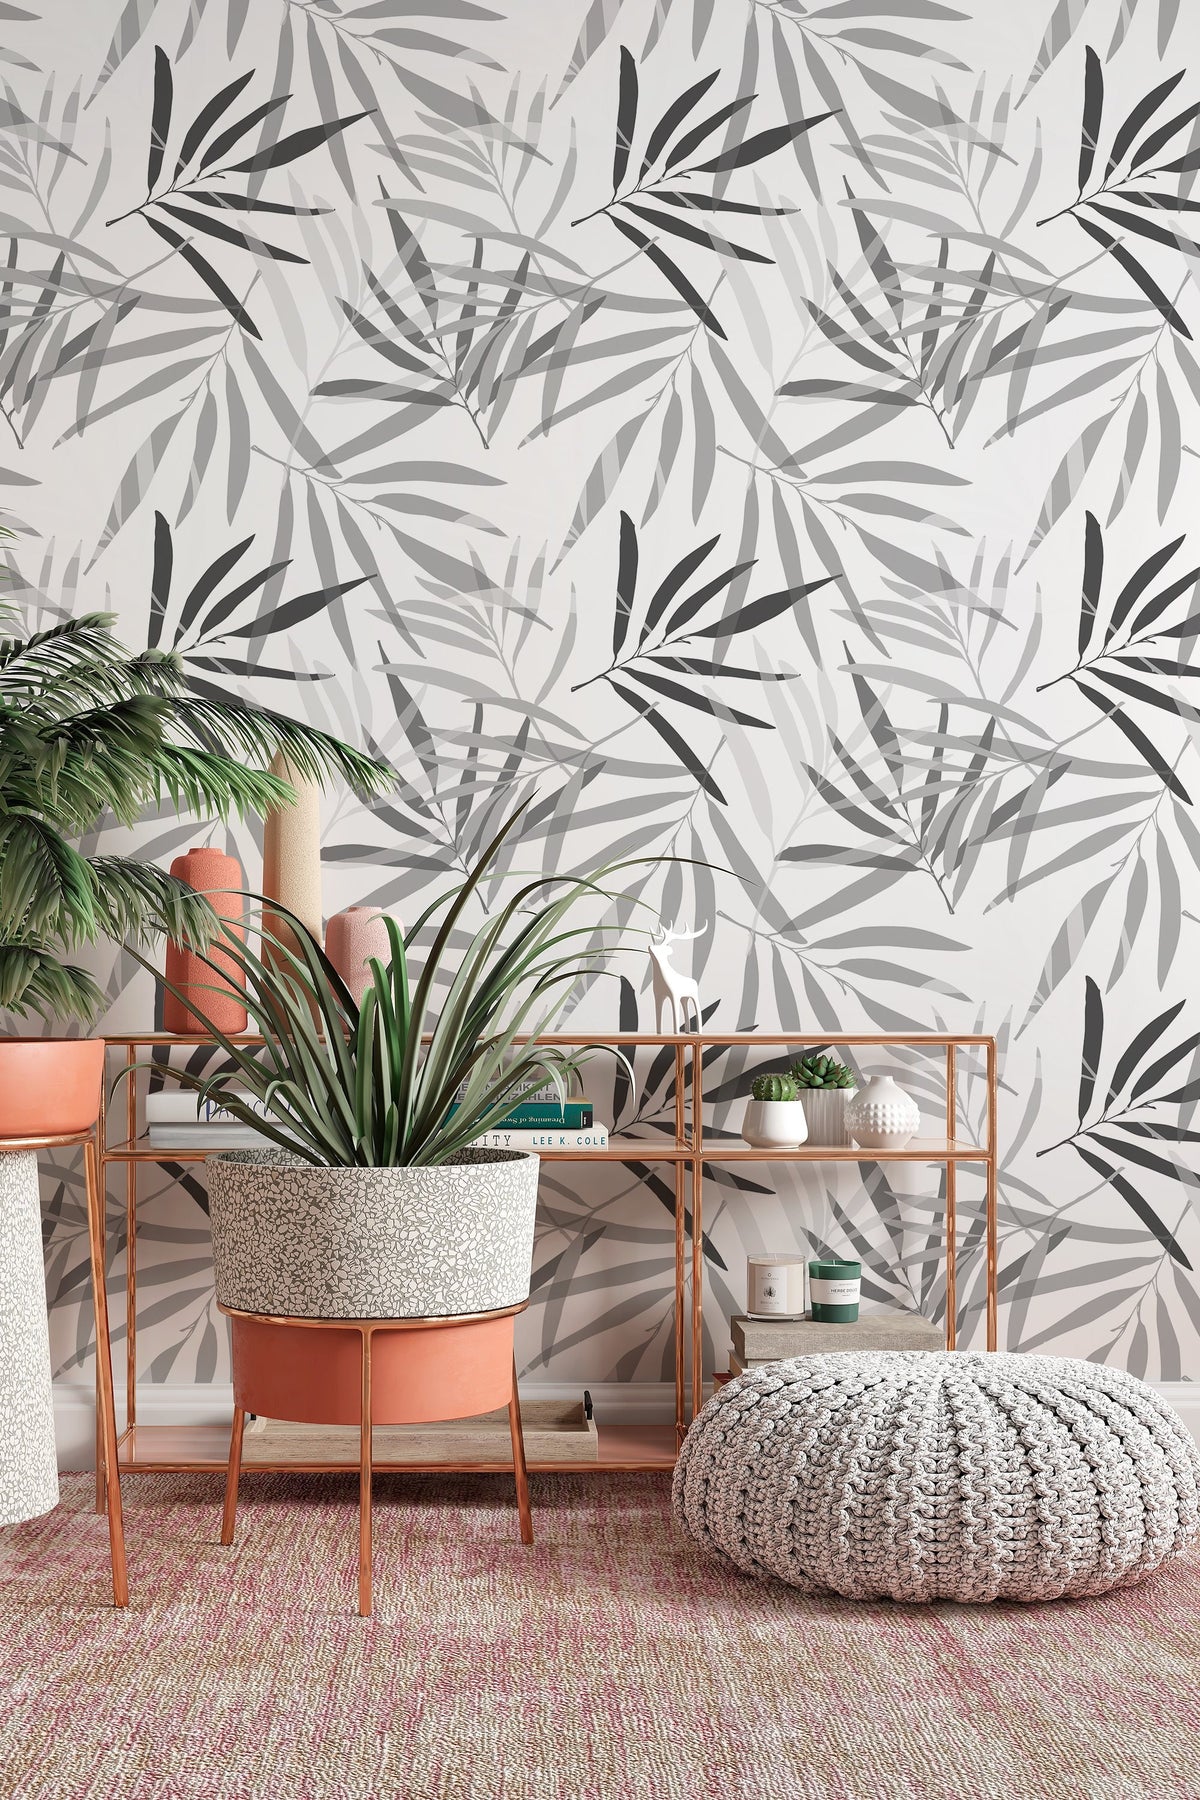 Buy Bamboo Wallpaper Online In India  Etsy India